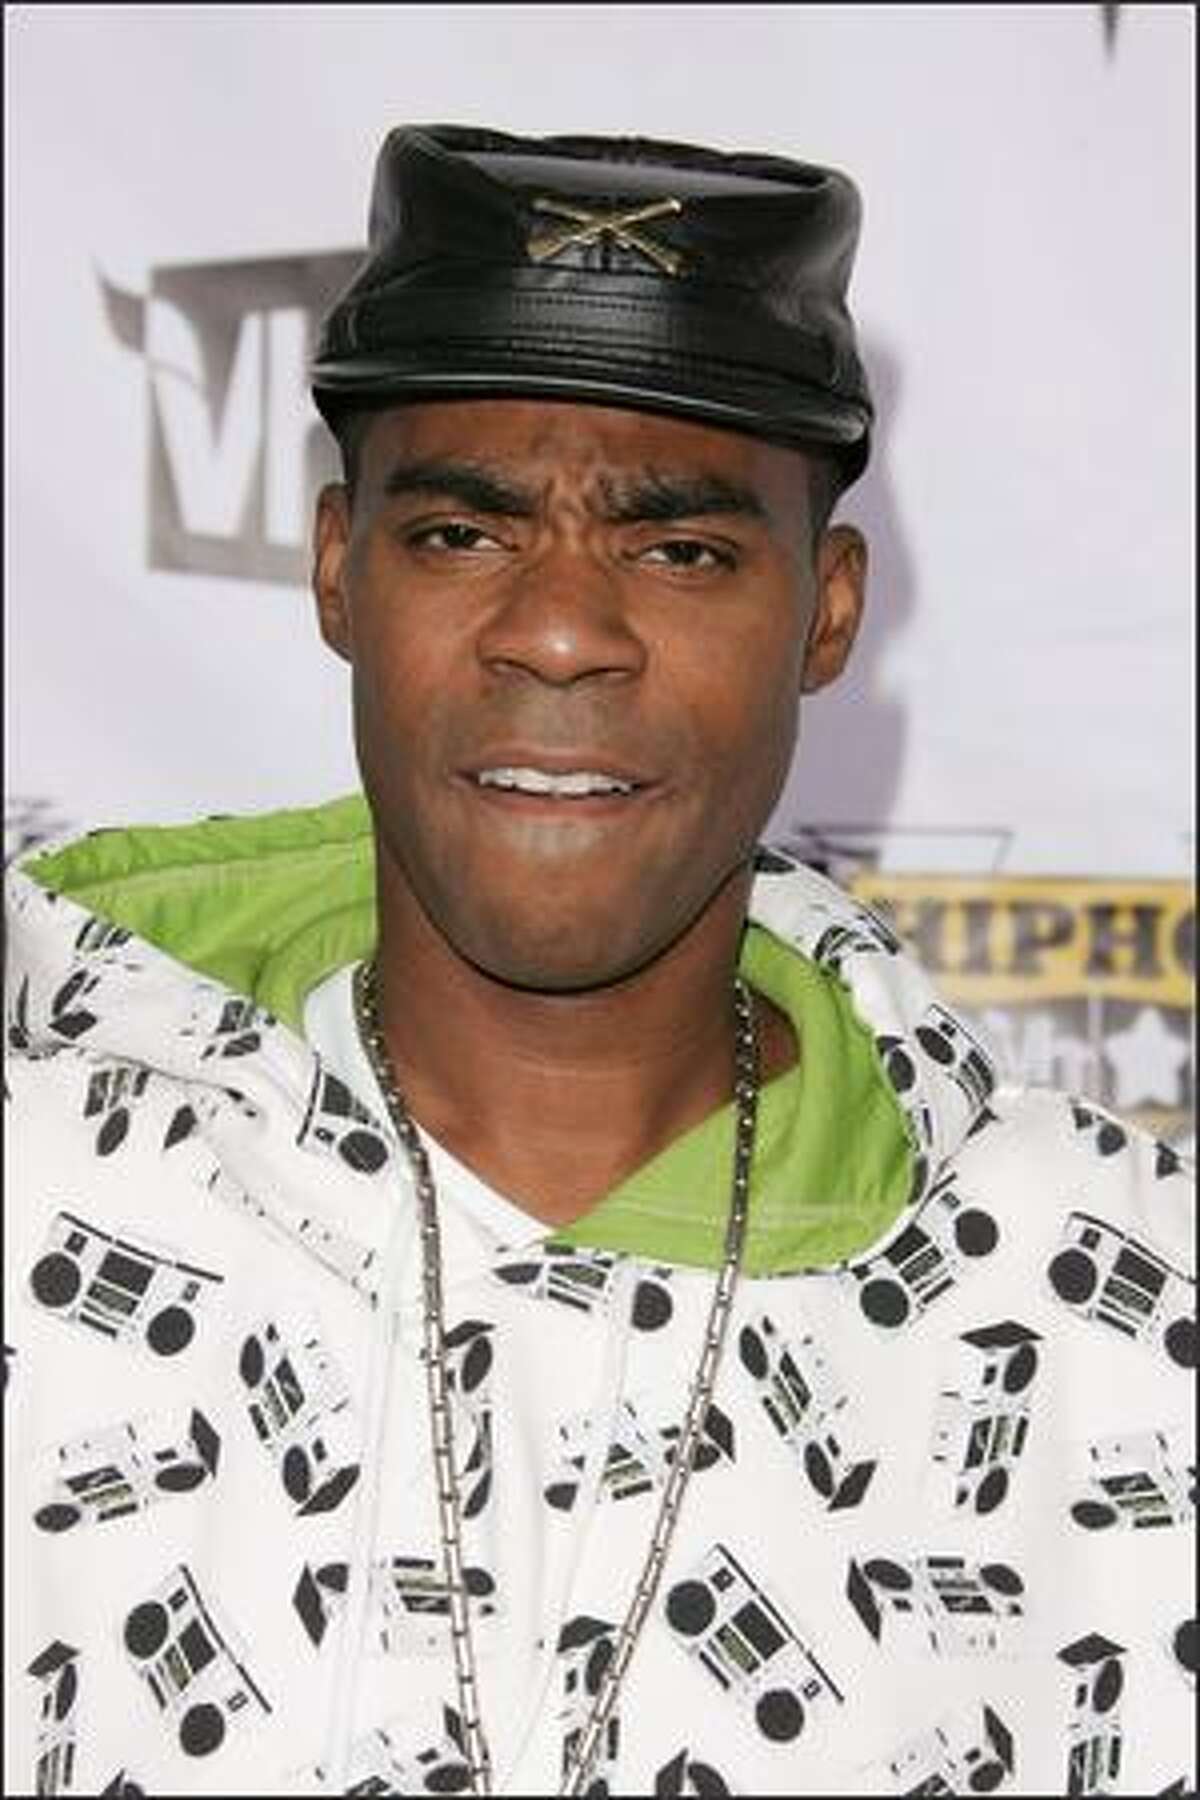 Host Tracy Morgan attends the 4th Annual VH1 Hip Hop Honors ceremony at the Hammerstein Ballroom on October 4, 2007 in New York City.